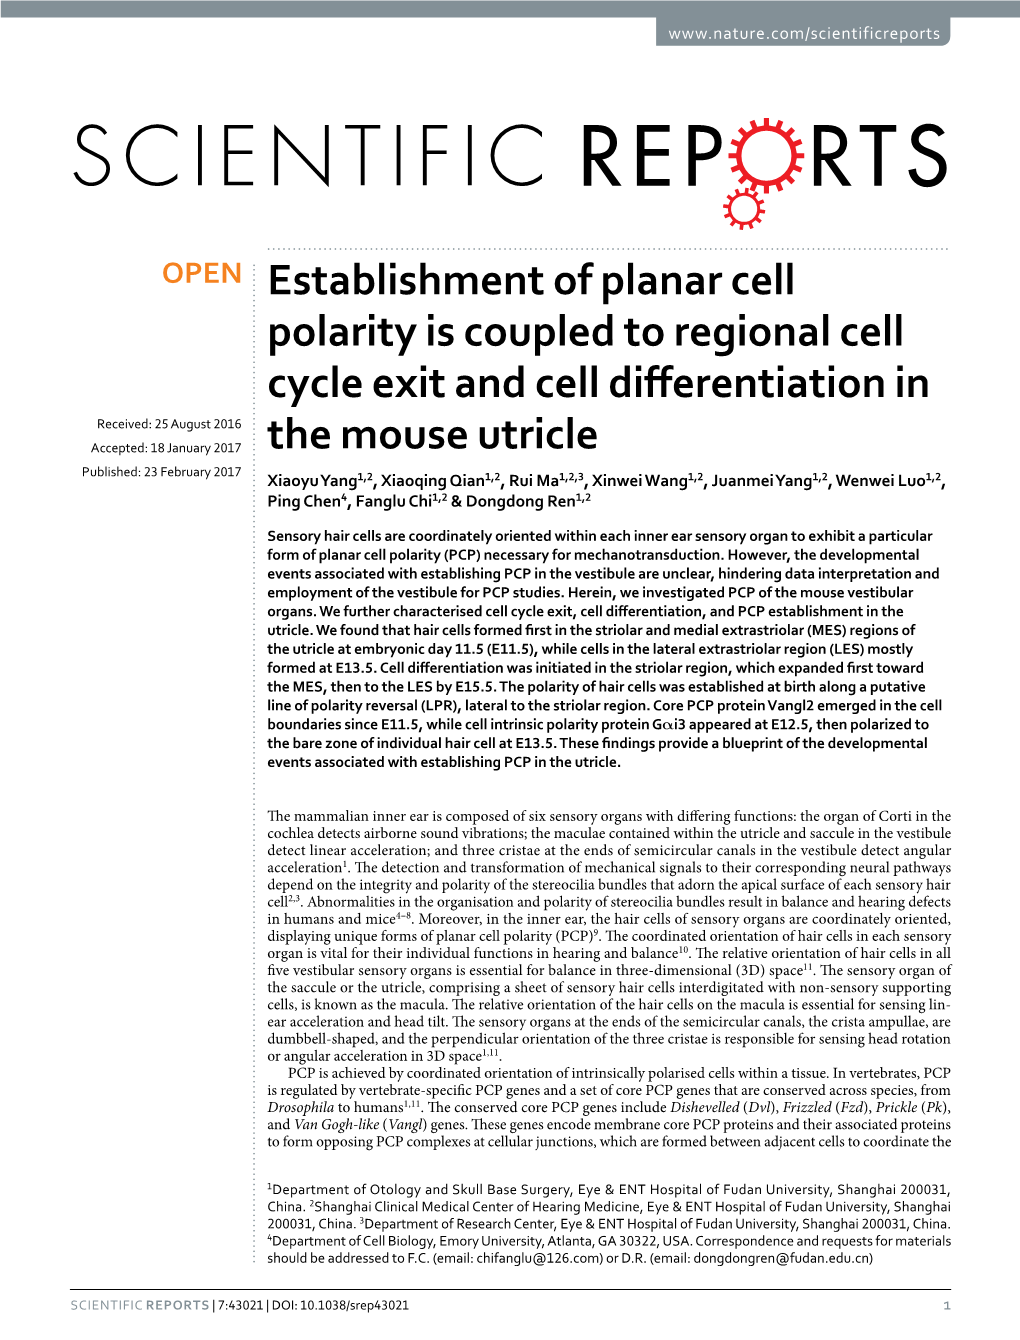 Establishment of Planar Cell Polarity Is Coupled to Regional Cell Cycle Exit